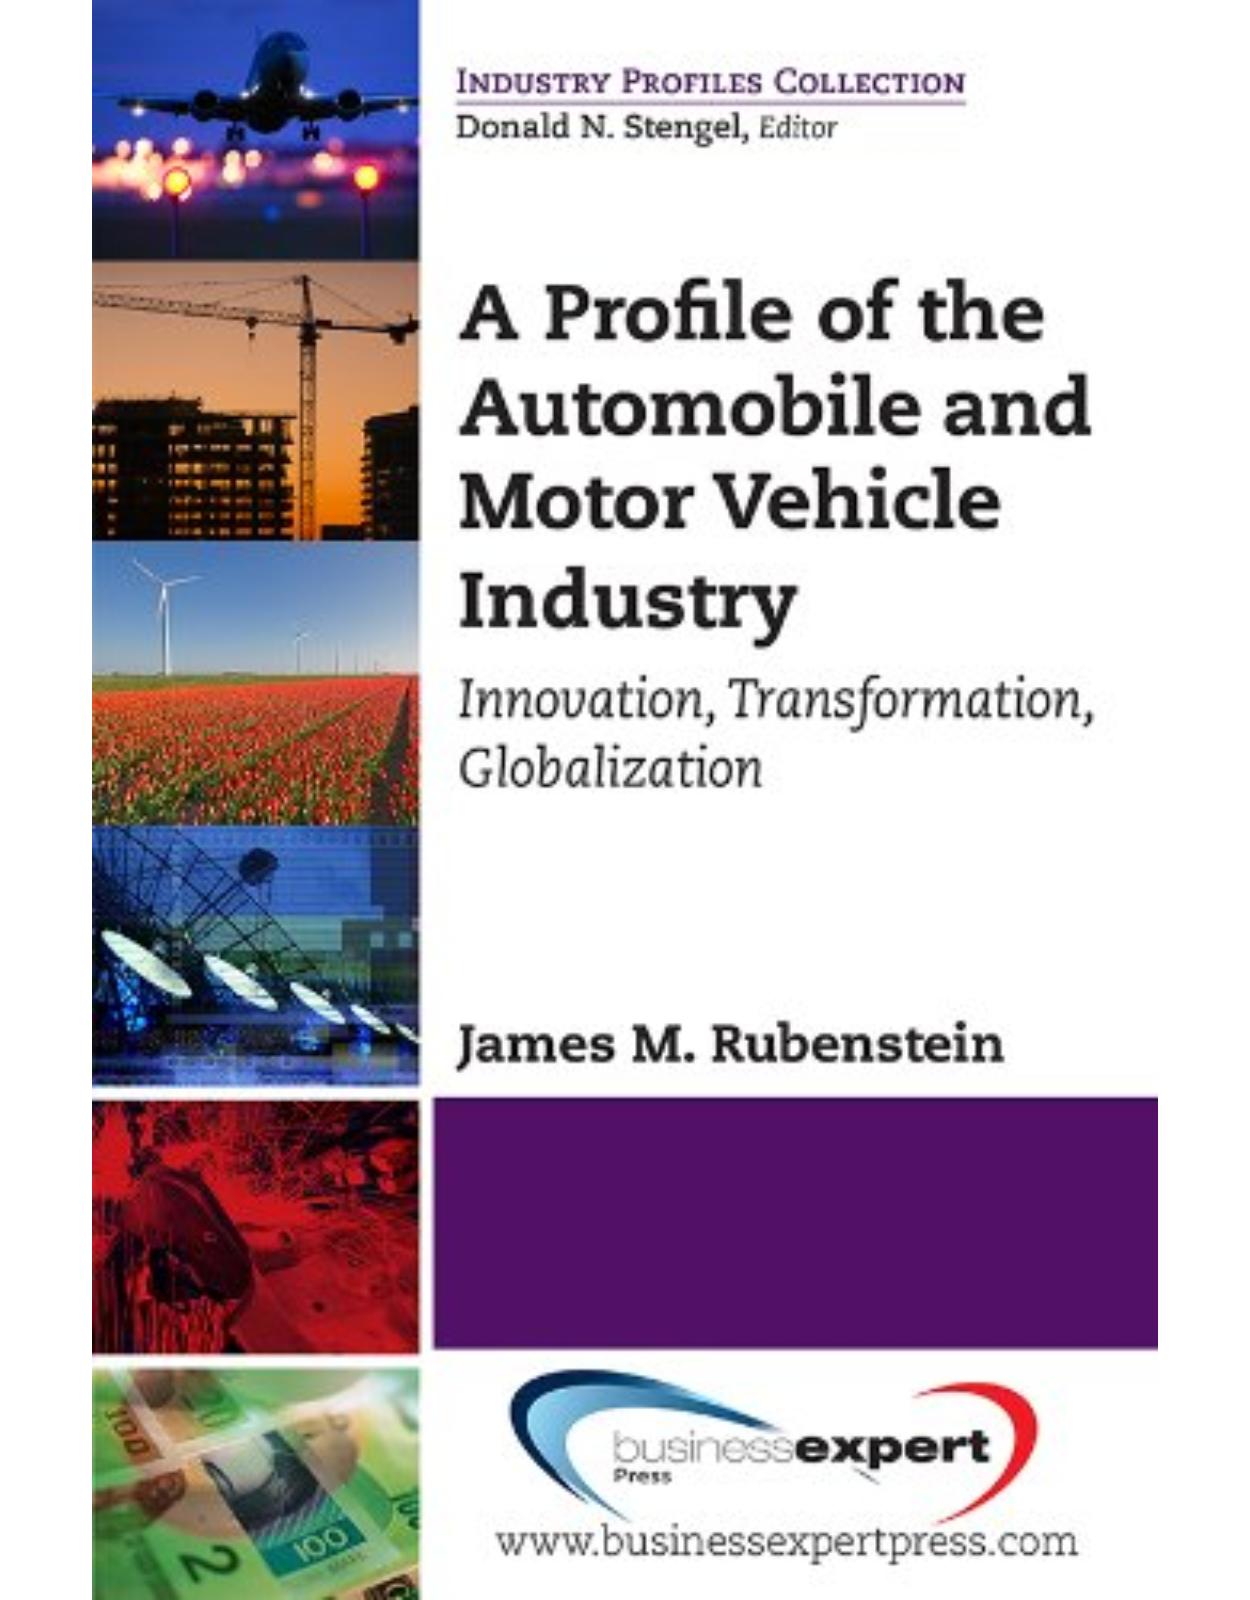 A Profile of the Automobile and Motor Vehicle Industry: Innovation, Transformation, Globalization (Industry Profiles Collection)